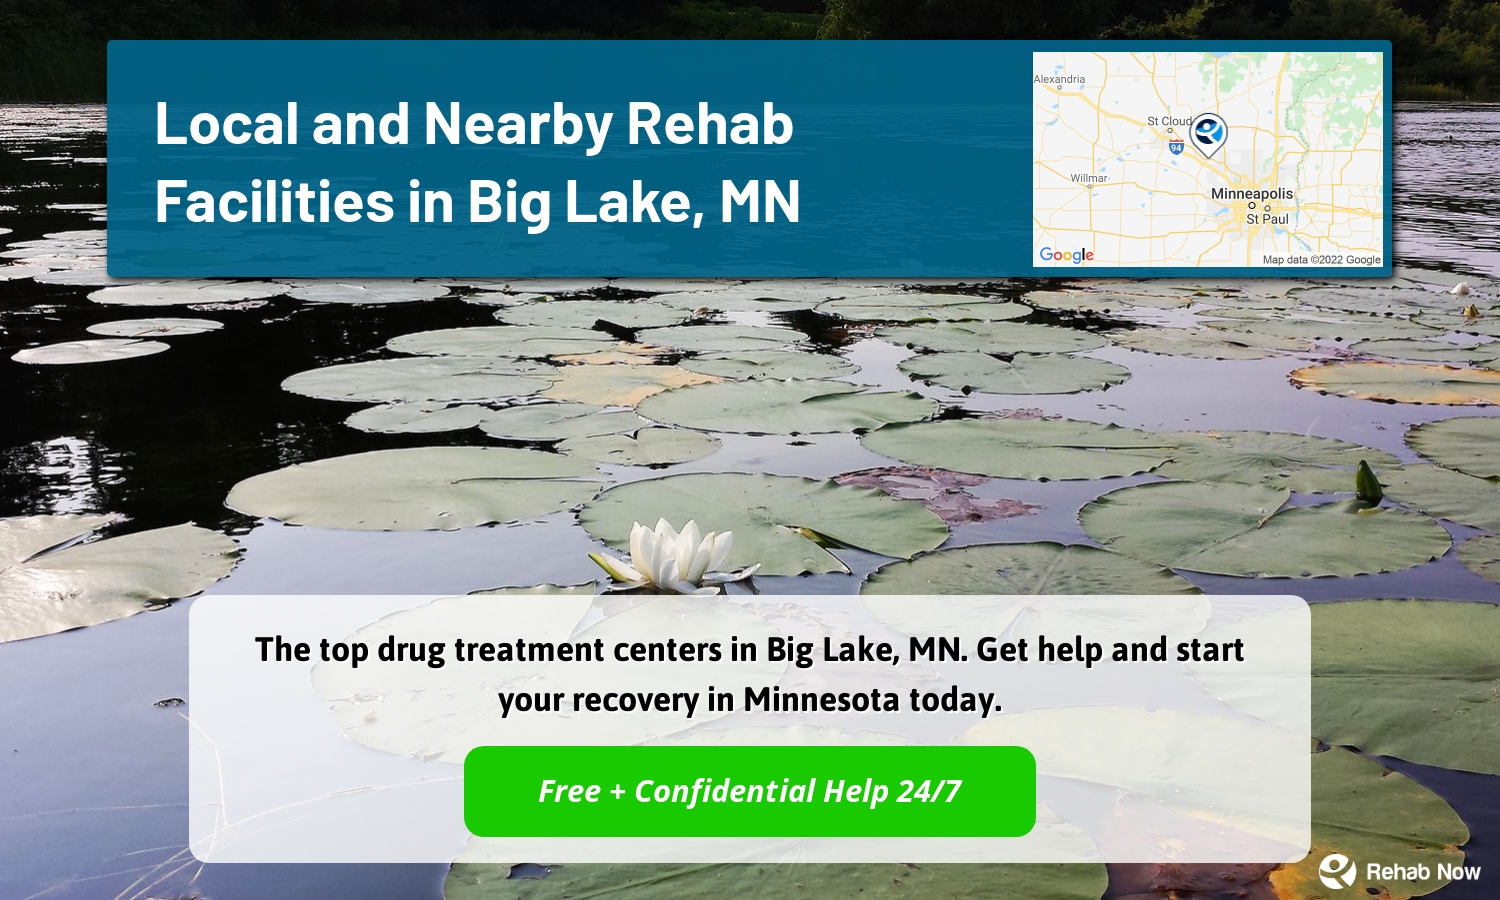 The top drug treatment centers in Big Lake, MN. Get help and start your recovery in Minnesota today.